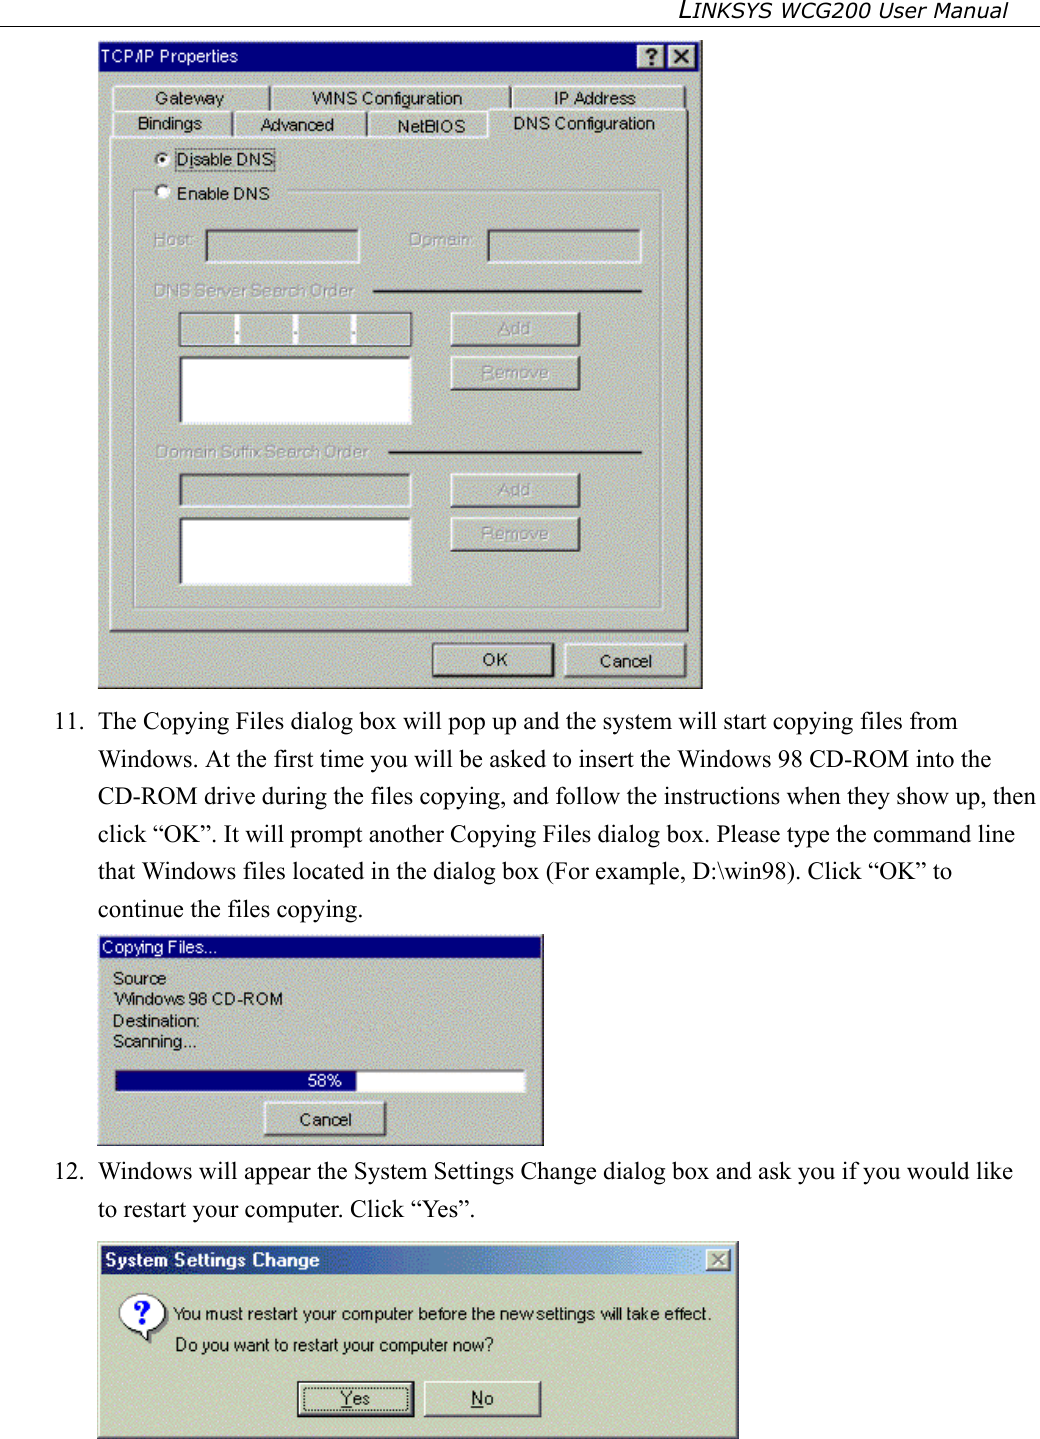 LINKSYS WCG200 User Manual    11.  The Copying Files dialog box will pop up and the system will start copying files from Windows. At the first time you will be asked to insert the Windows 98 CD-ROM into the CD-ROM drive during the files copying, and follow the instructions when they show up, then click “OK”. It will prompt another Copying Files dialog box. Please type the command line that Windows files located in the dialog box (For example, D:\win98). Click “OK” to continue the files copying.  12.  Windows will appear the System Settings Change dialog box and ask you if you would like to restart your computer. Click “Yes”.   